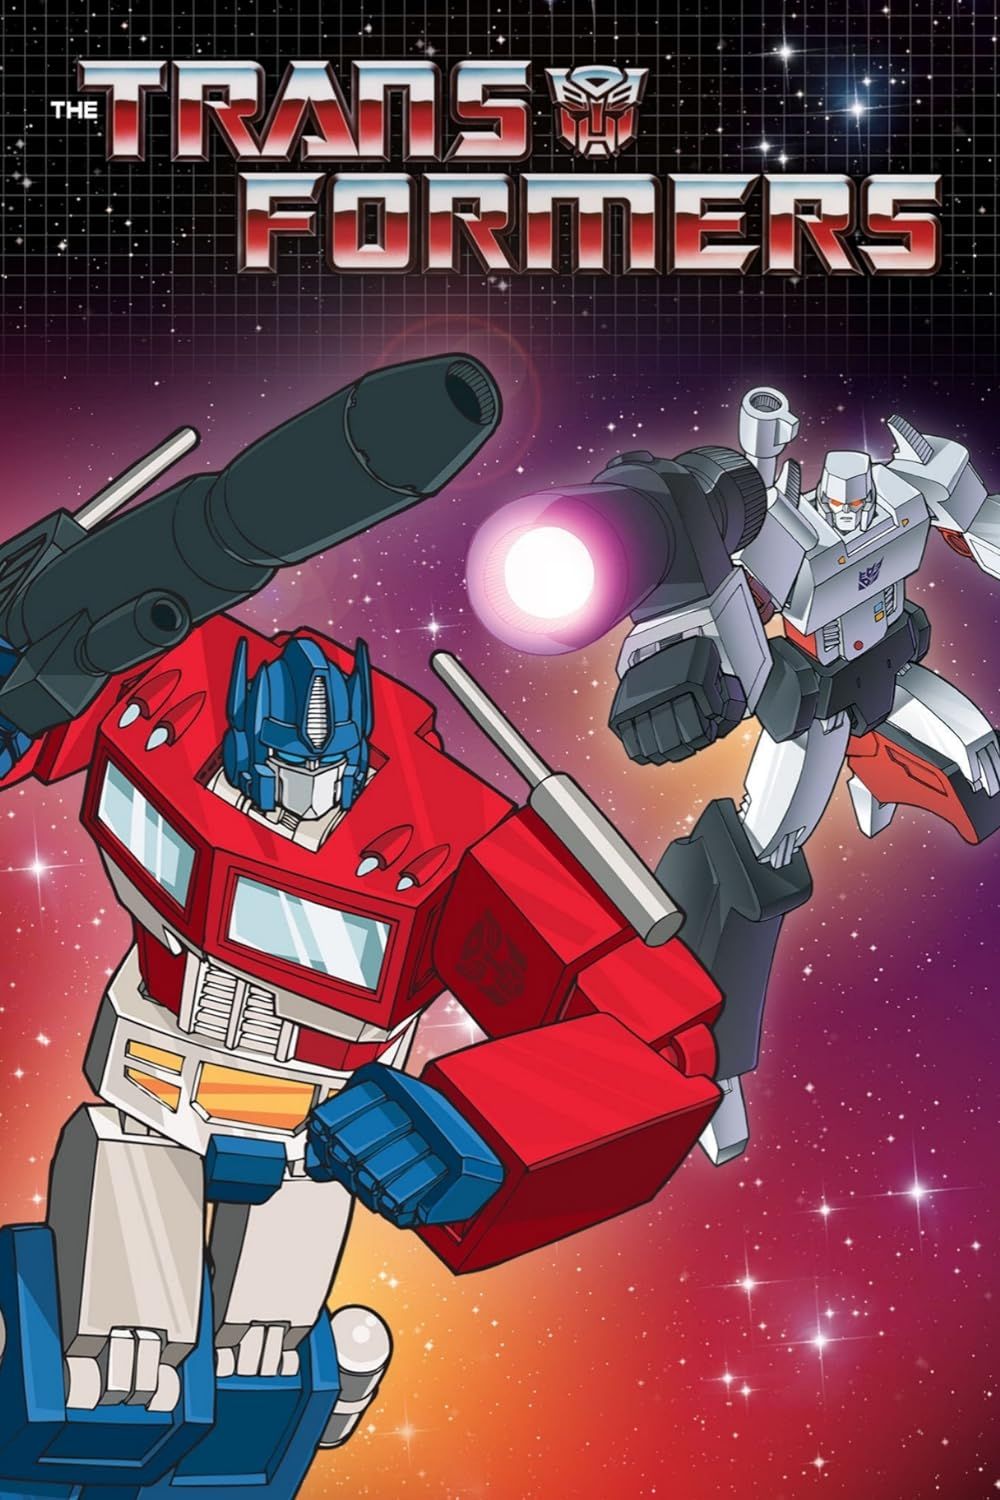 Optimus Prime fighting Megatron on the poster of The Transformers